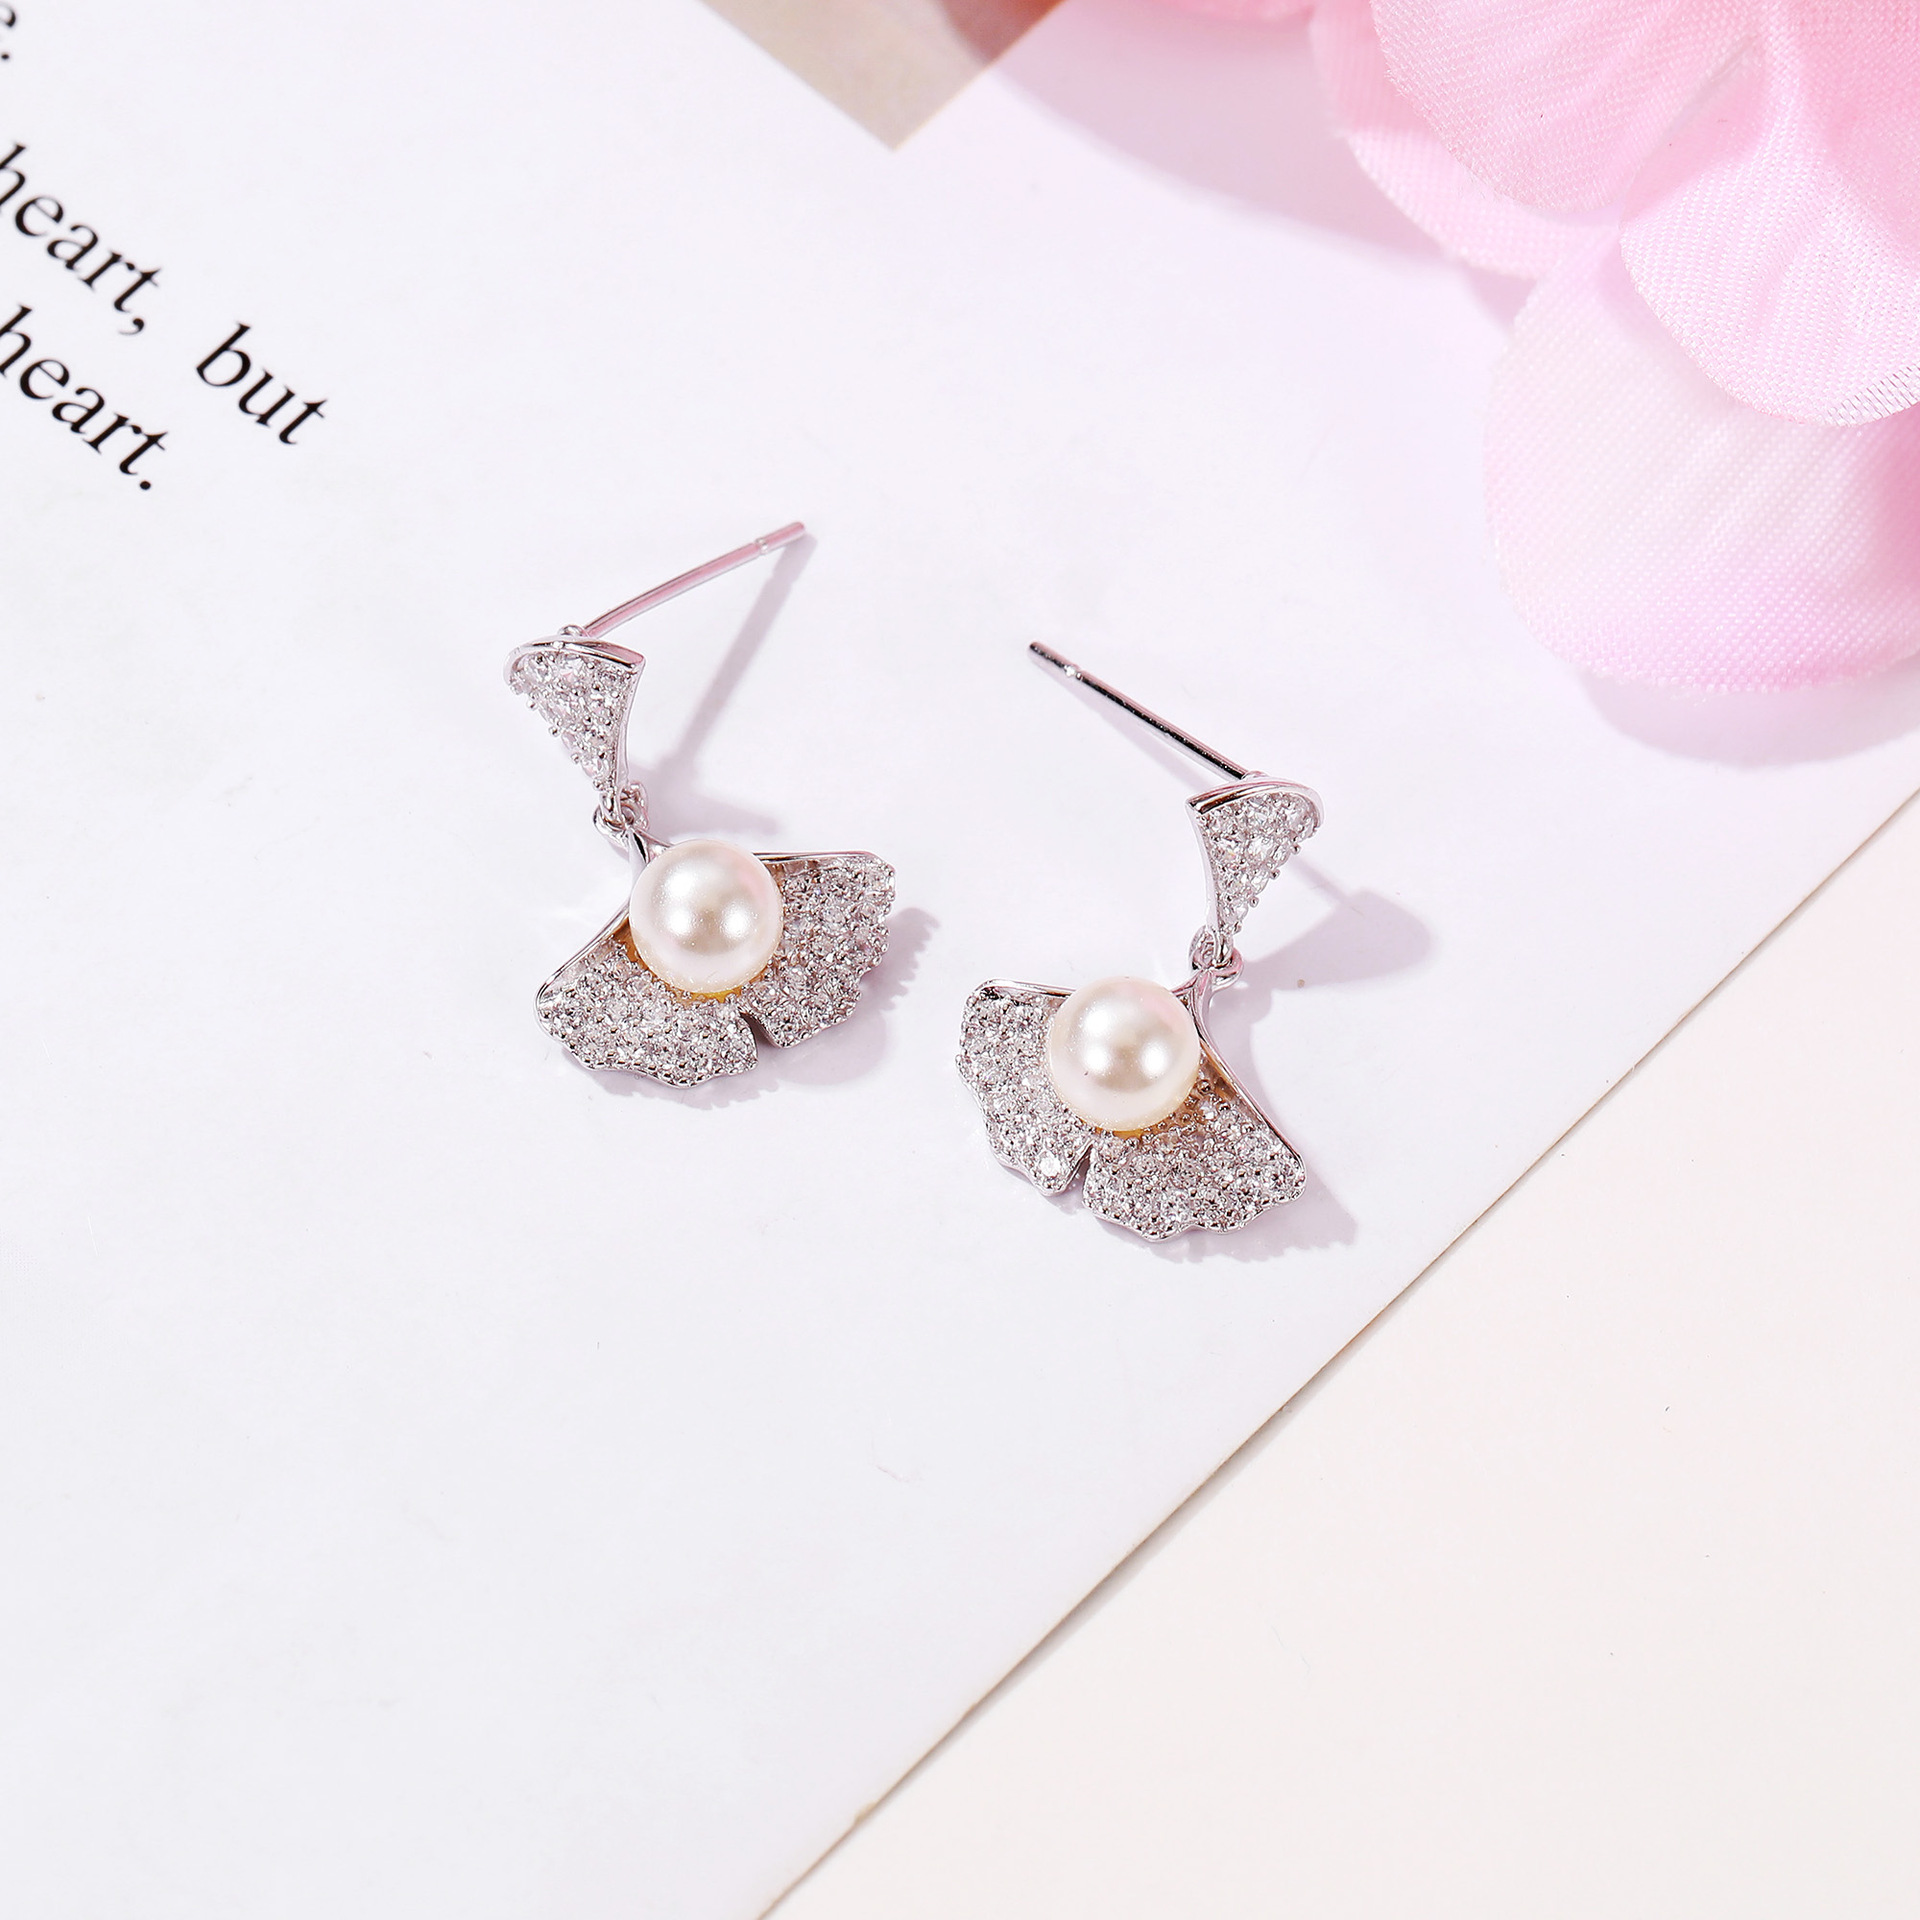 Cz with Fresh Water Pearl Gingko Leaf Sterling Silver Earrings